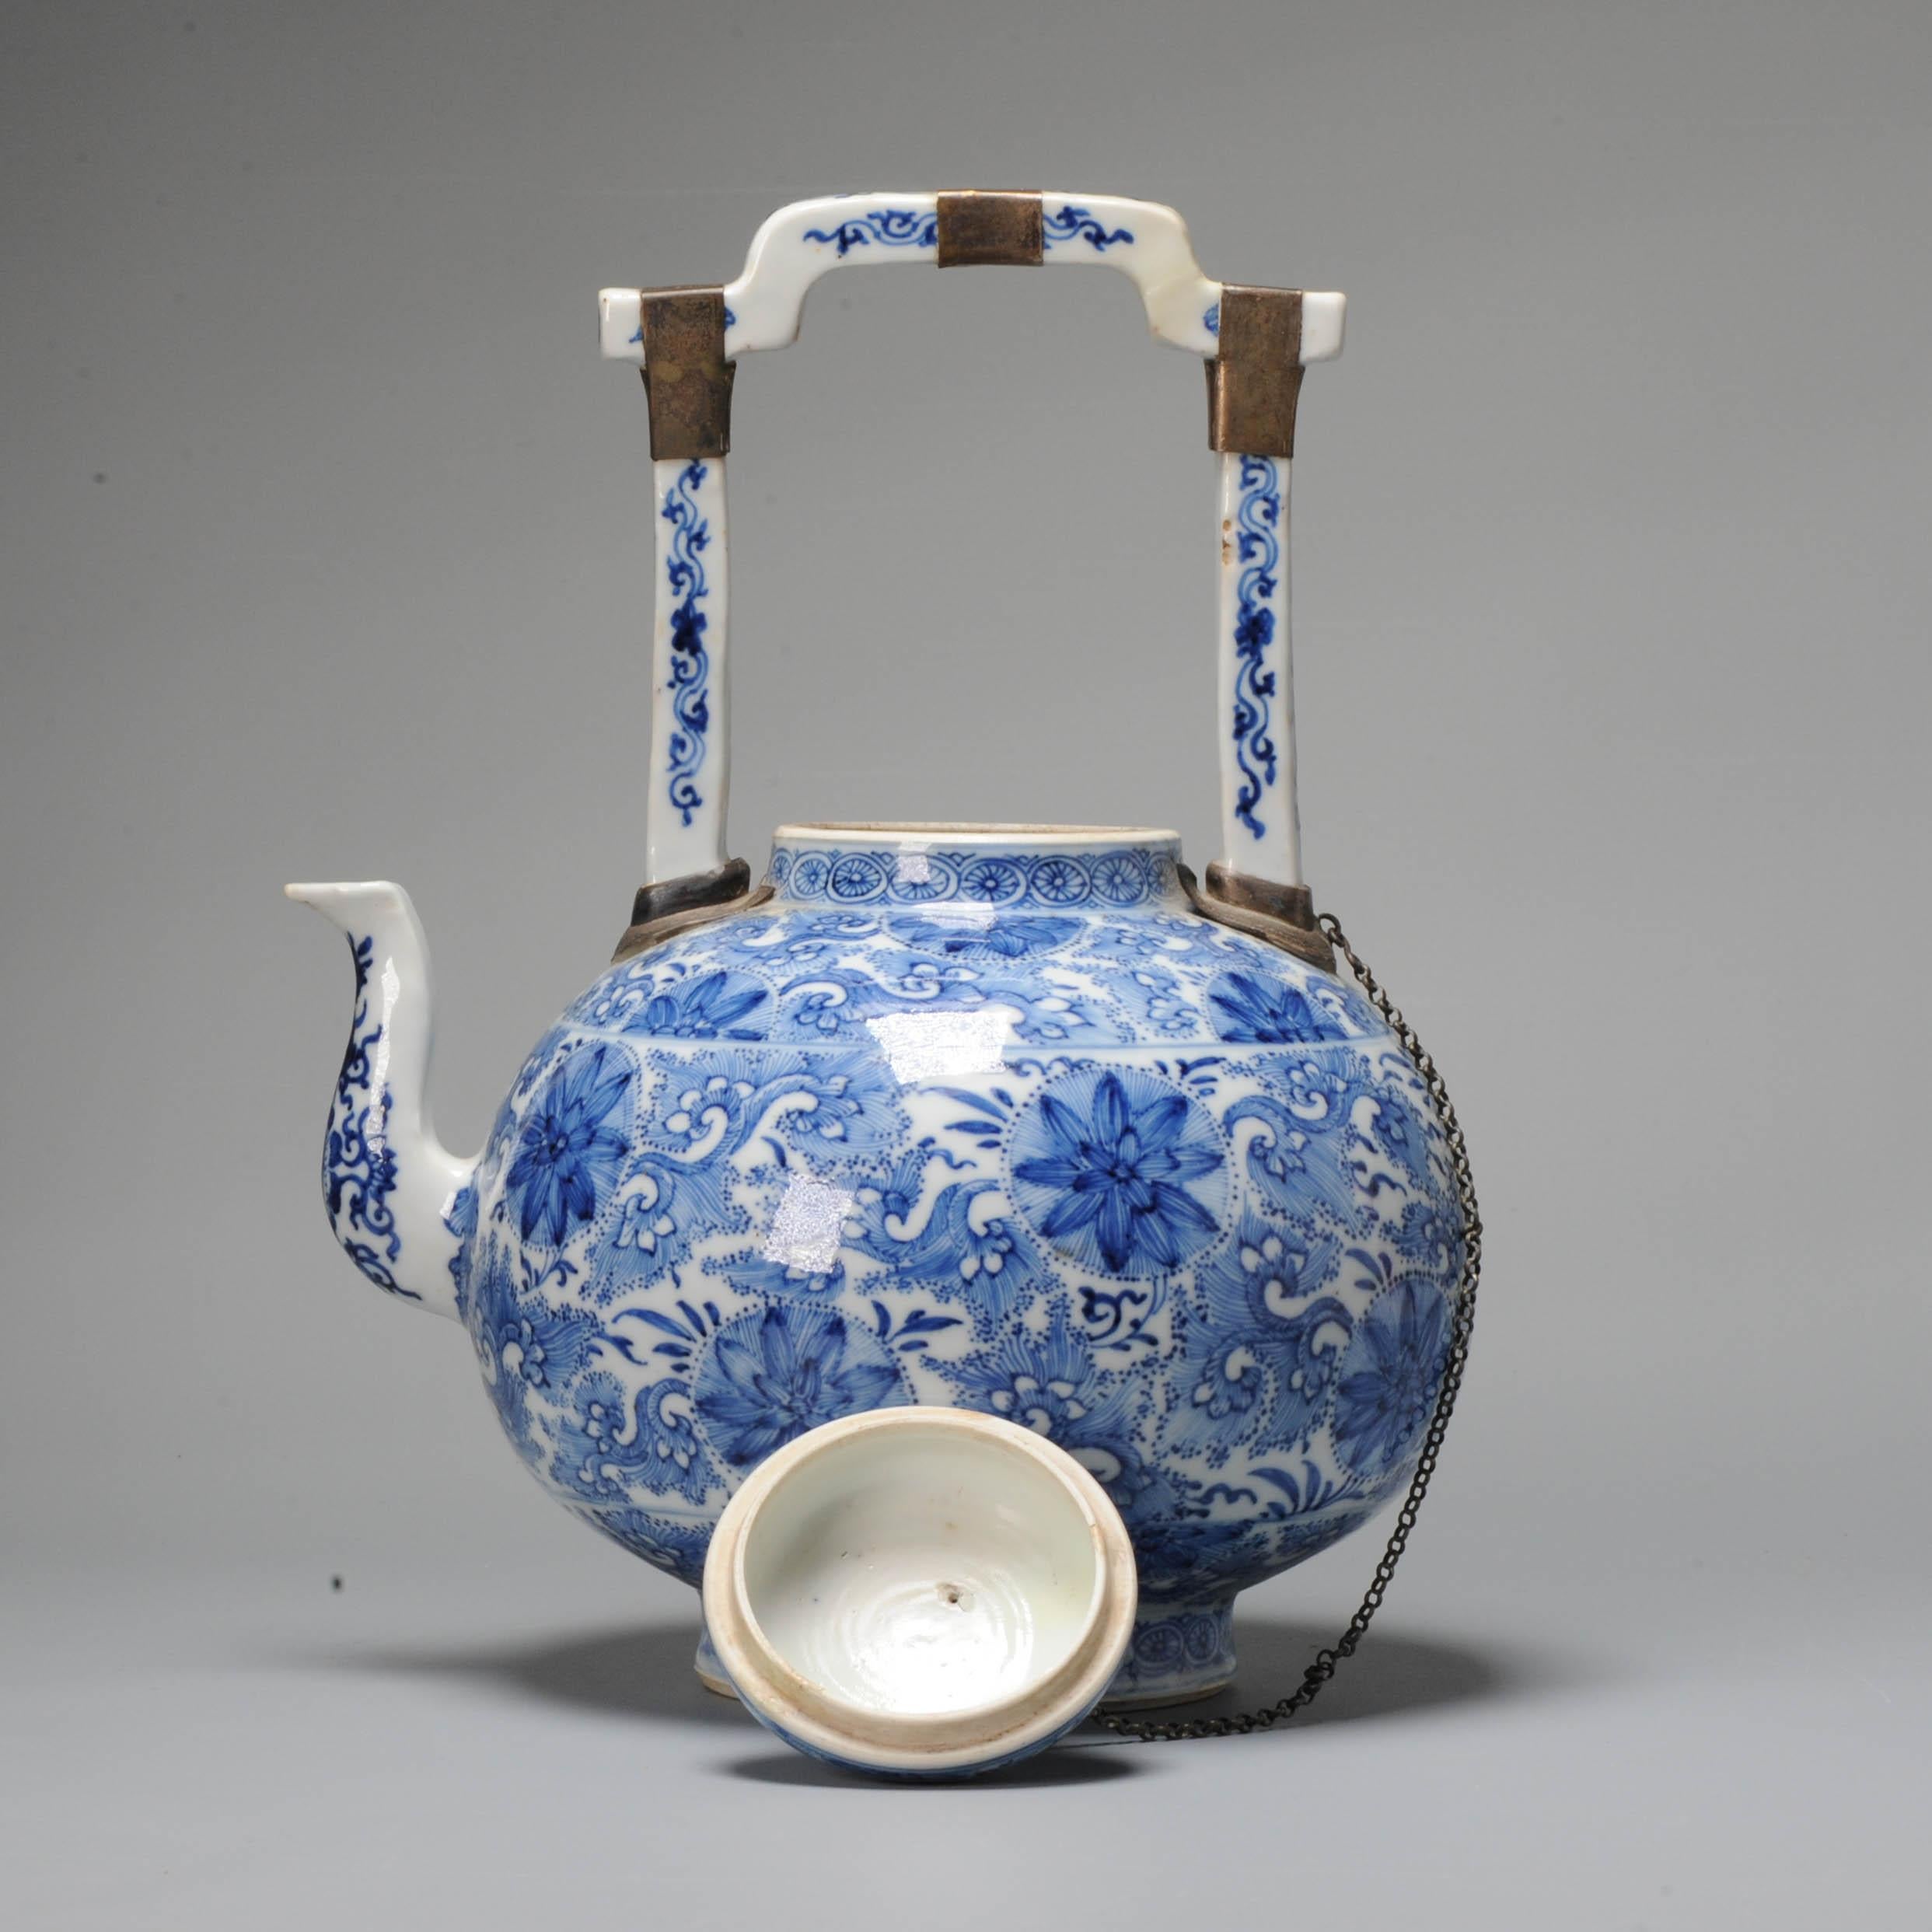 The large cobalt blue wine vessel with nice handle and beautiful decoration of flowers. The cobalt blue and painting quality are amazing to my humble opinion. A high quality and unusual piece from the Kangxi period. 2 concentric circles at te